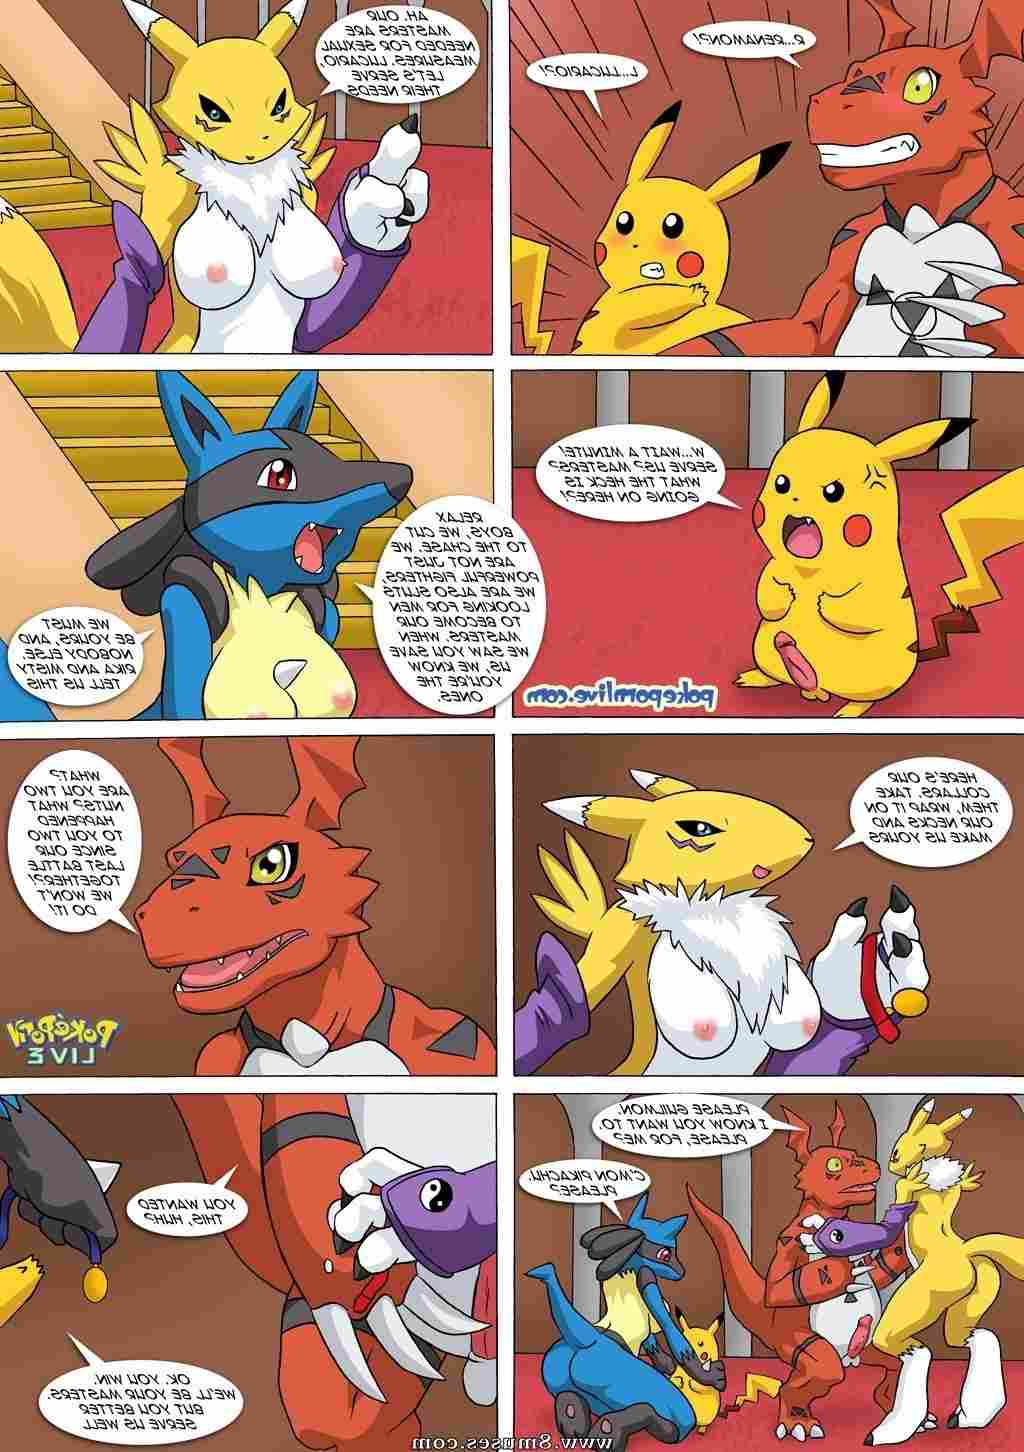 PokepornLive-Comics/Girls-come-to-play Girls_come_to_play__8muses_-_Sex_and_Porn_Comics_5.jpg